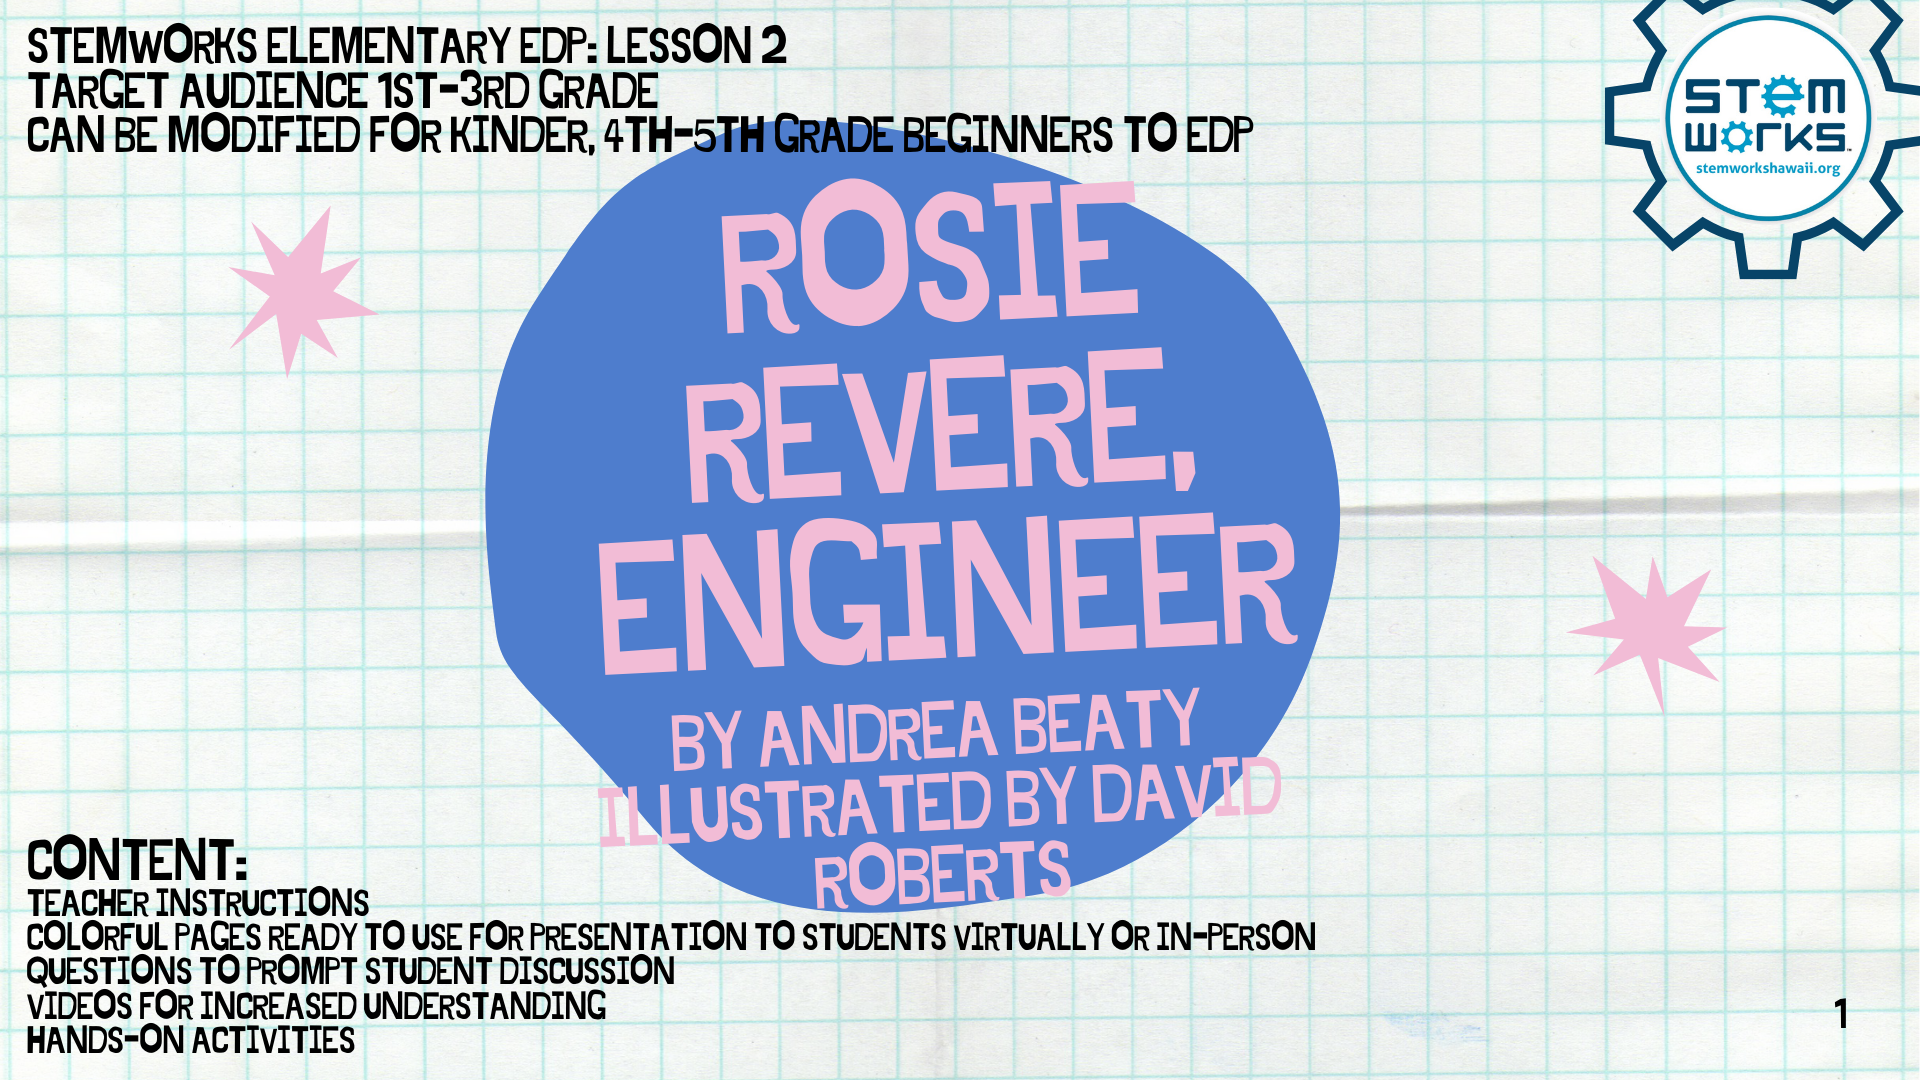 Student Slides Only_Rosie Revere, Engineer.png